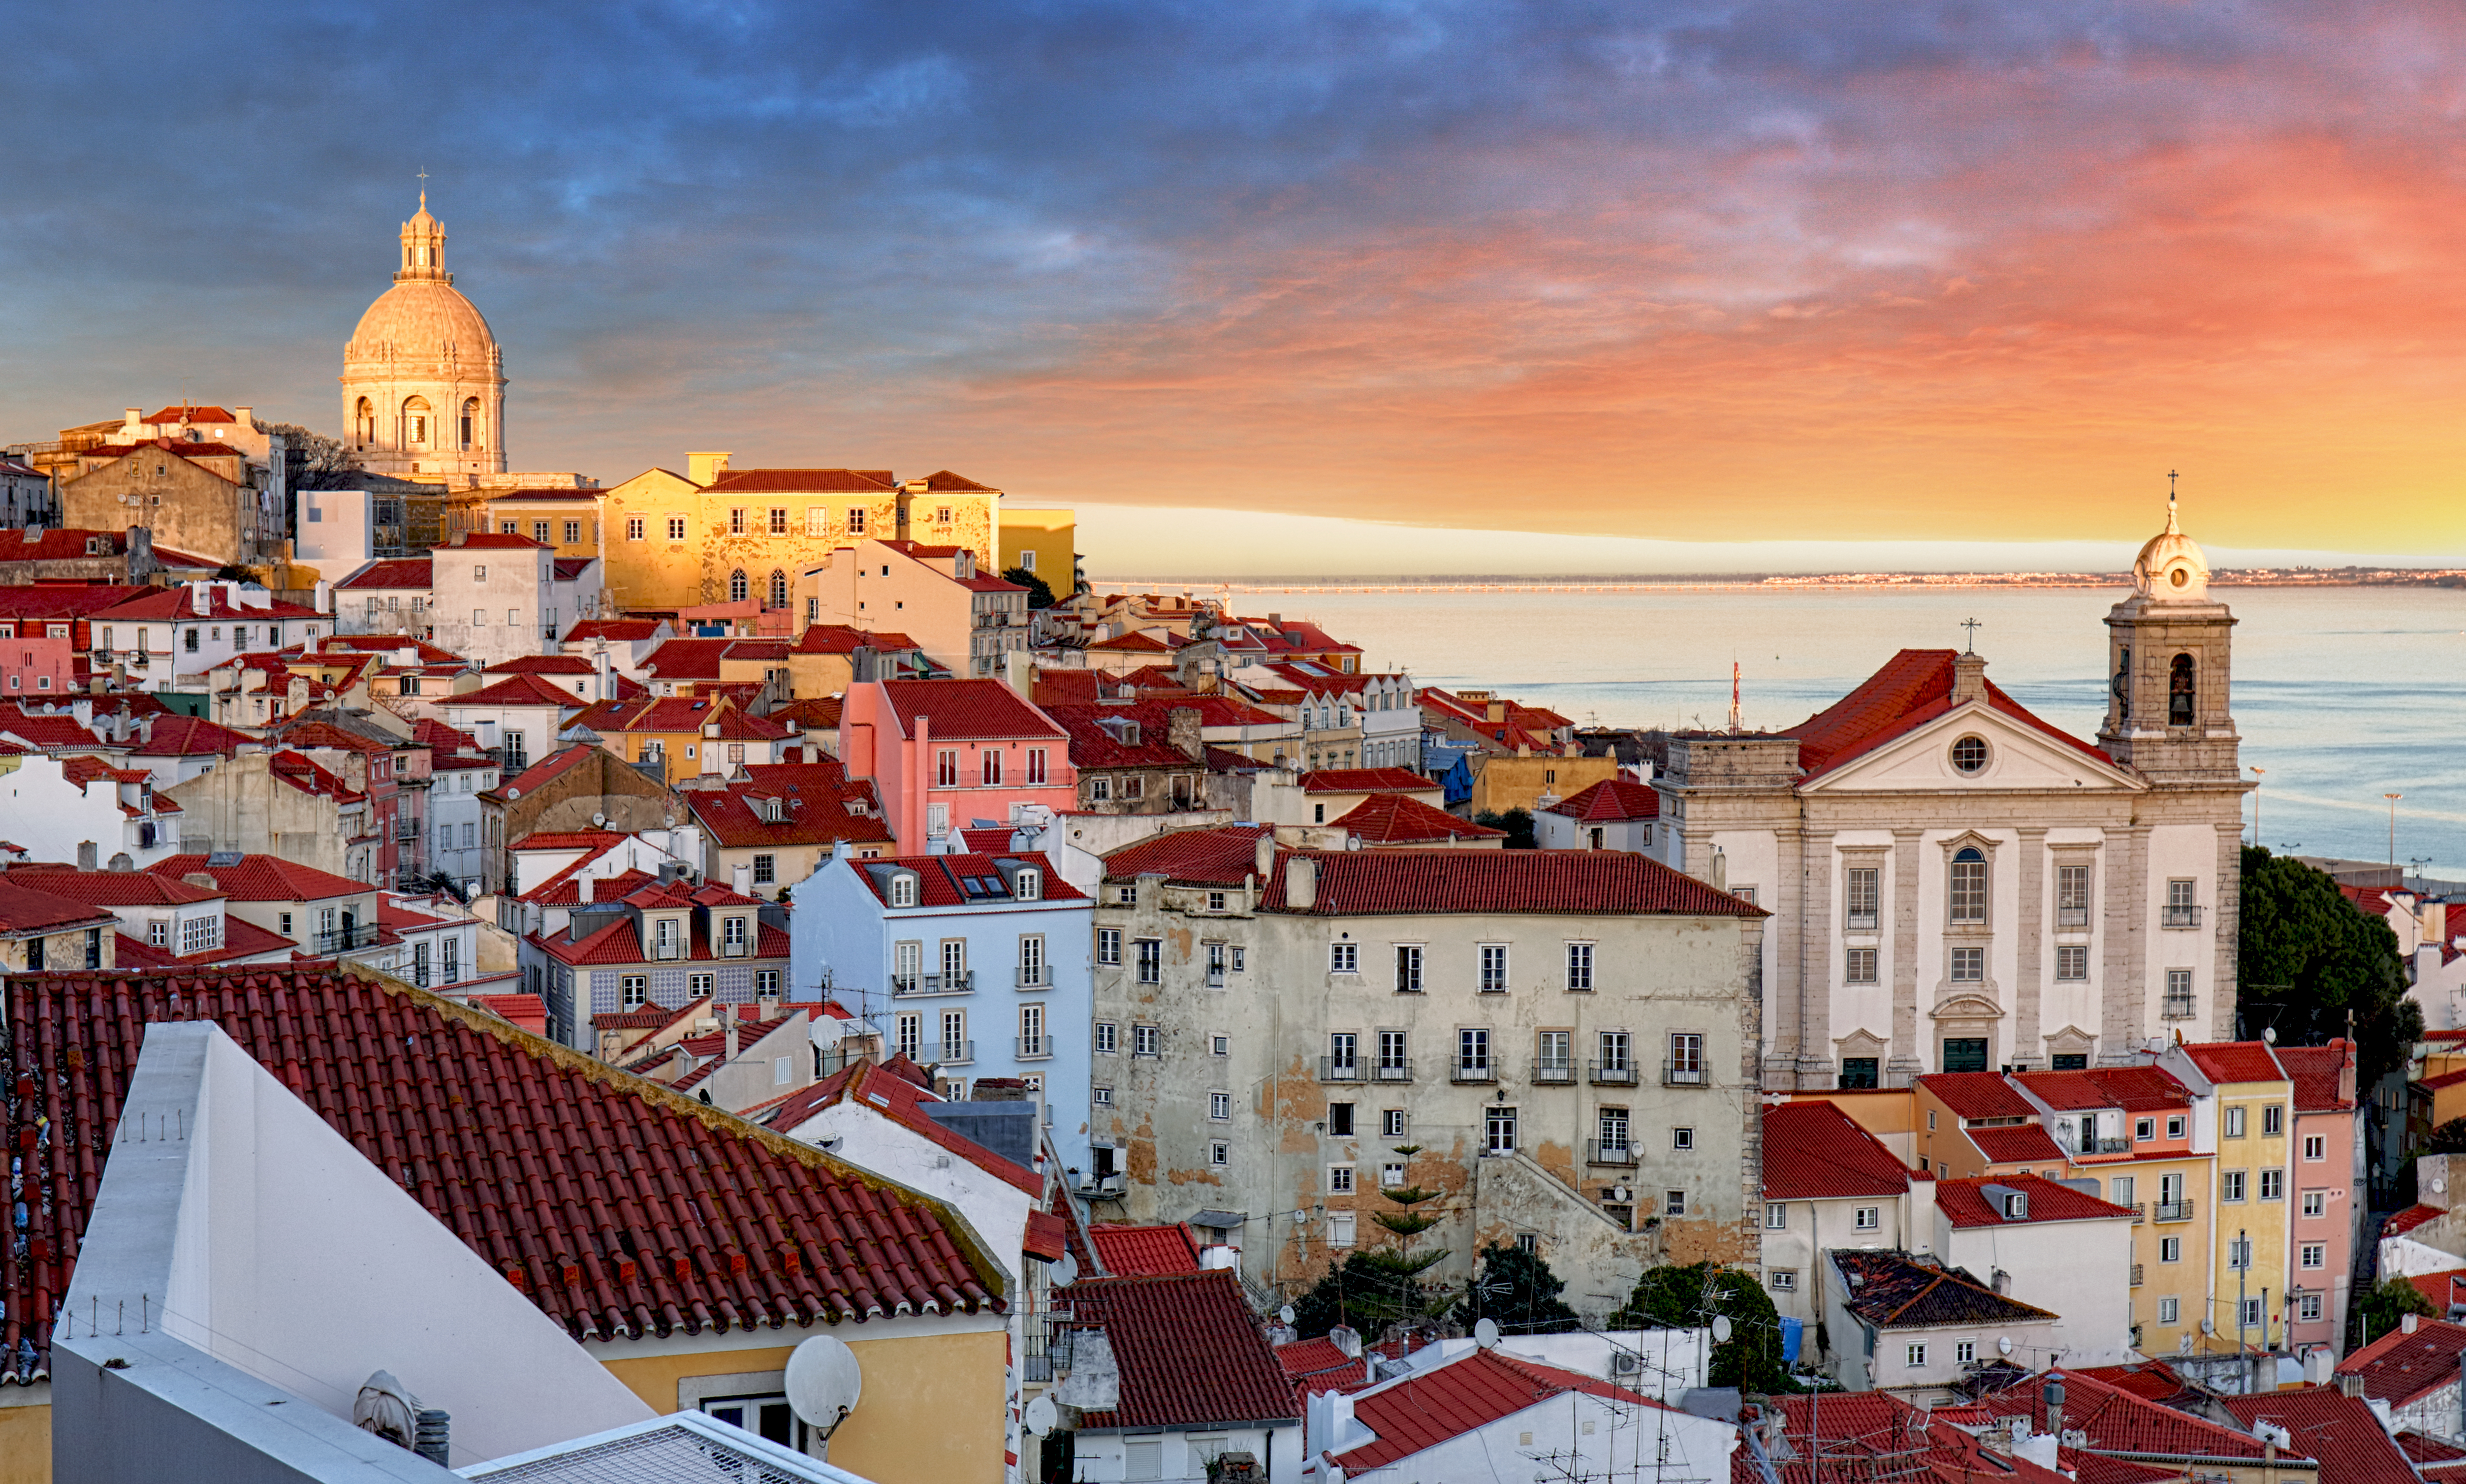 The Portuguese capital, located at the mouth of the Tagus River, boasts impressive vestiges of medieval architecture. Running in Lisbon means enjoying the coolness of the seaside, admiring the Belem Tower or the sumptuous Hieronymites monastery.